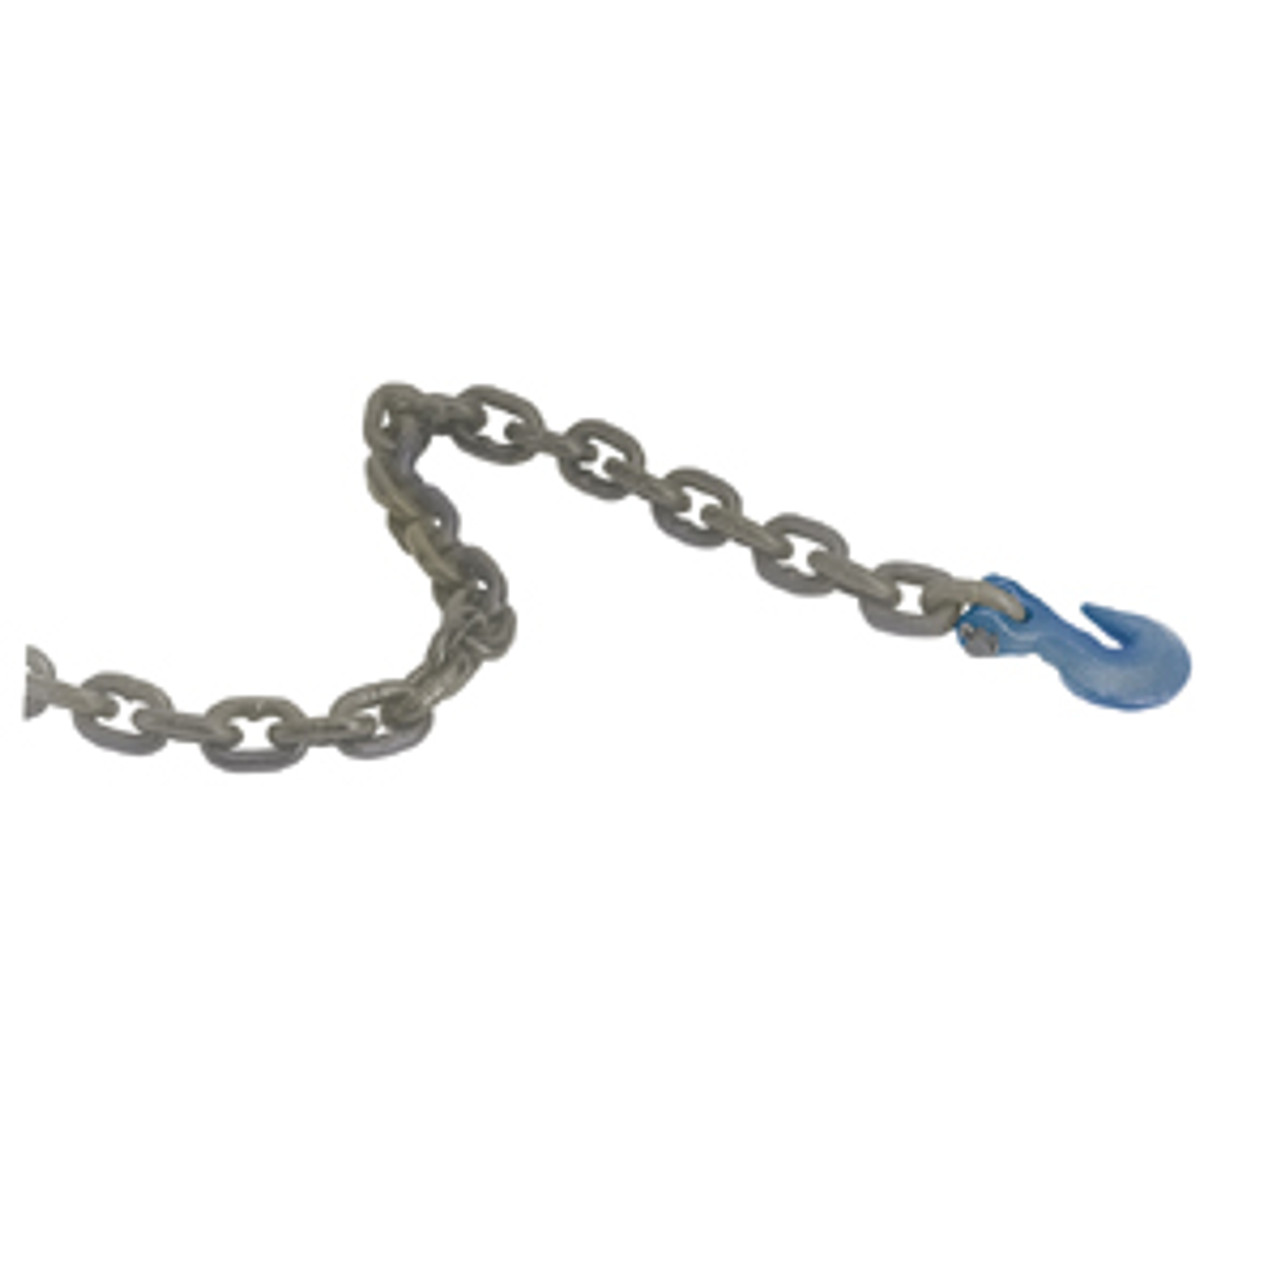 8 Chain, Double Hook, 3/8 Alloy Links, 7100 lbs - Comstar Supply